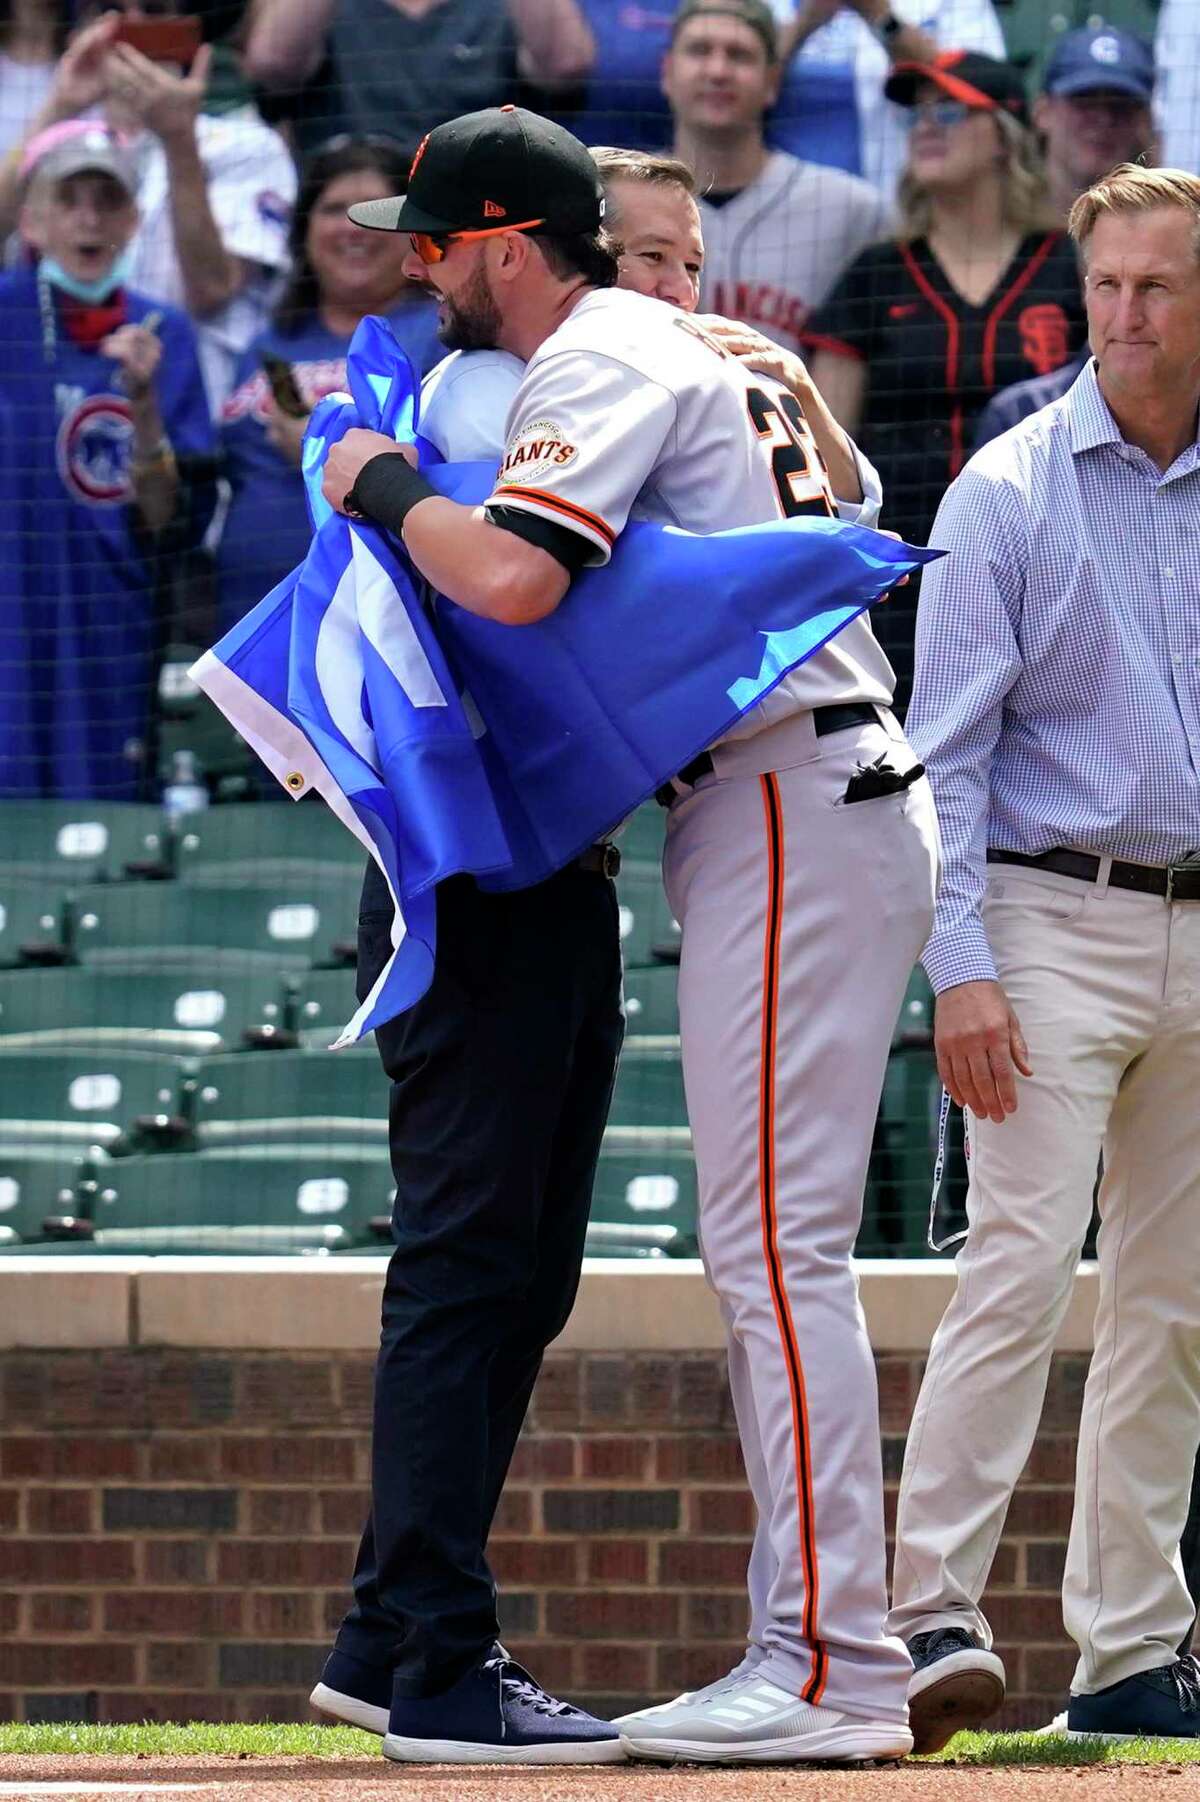 Chicago Cubs owner Tom Ricketts, left, embraces San Francisco Giants' Kris Bryant before a baseball game in Chicago, Friday, Sept. 10, 2021. (AP Photo/Nam Y. Huh)